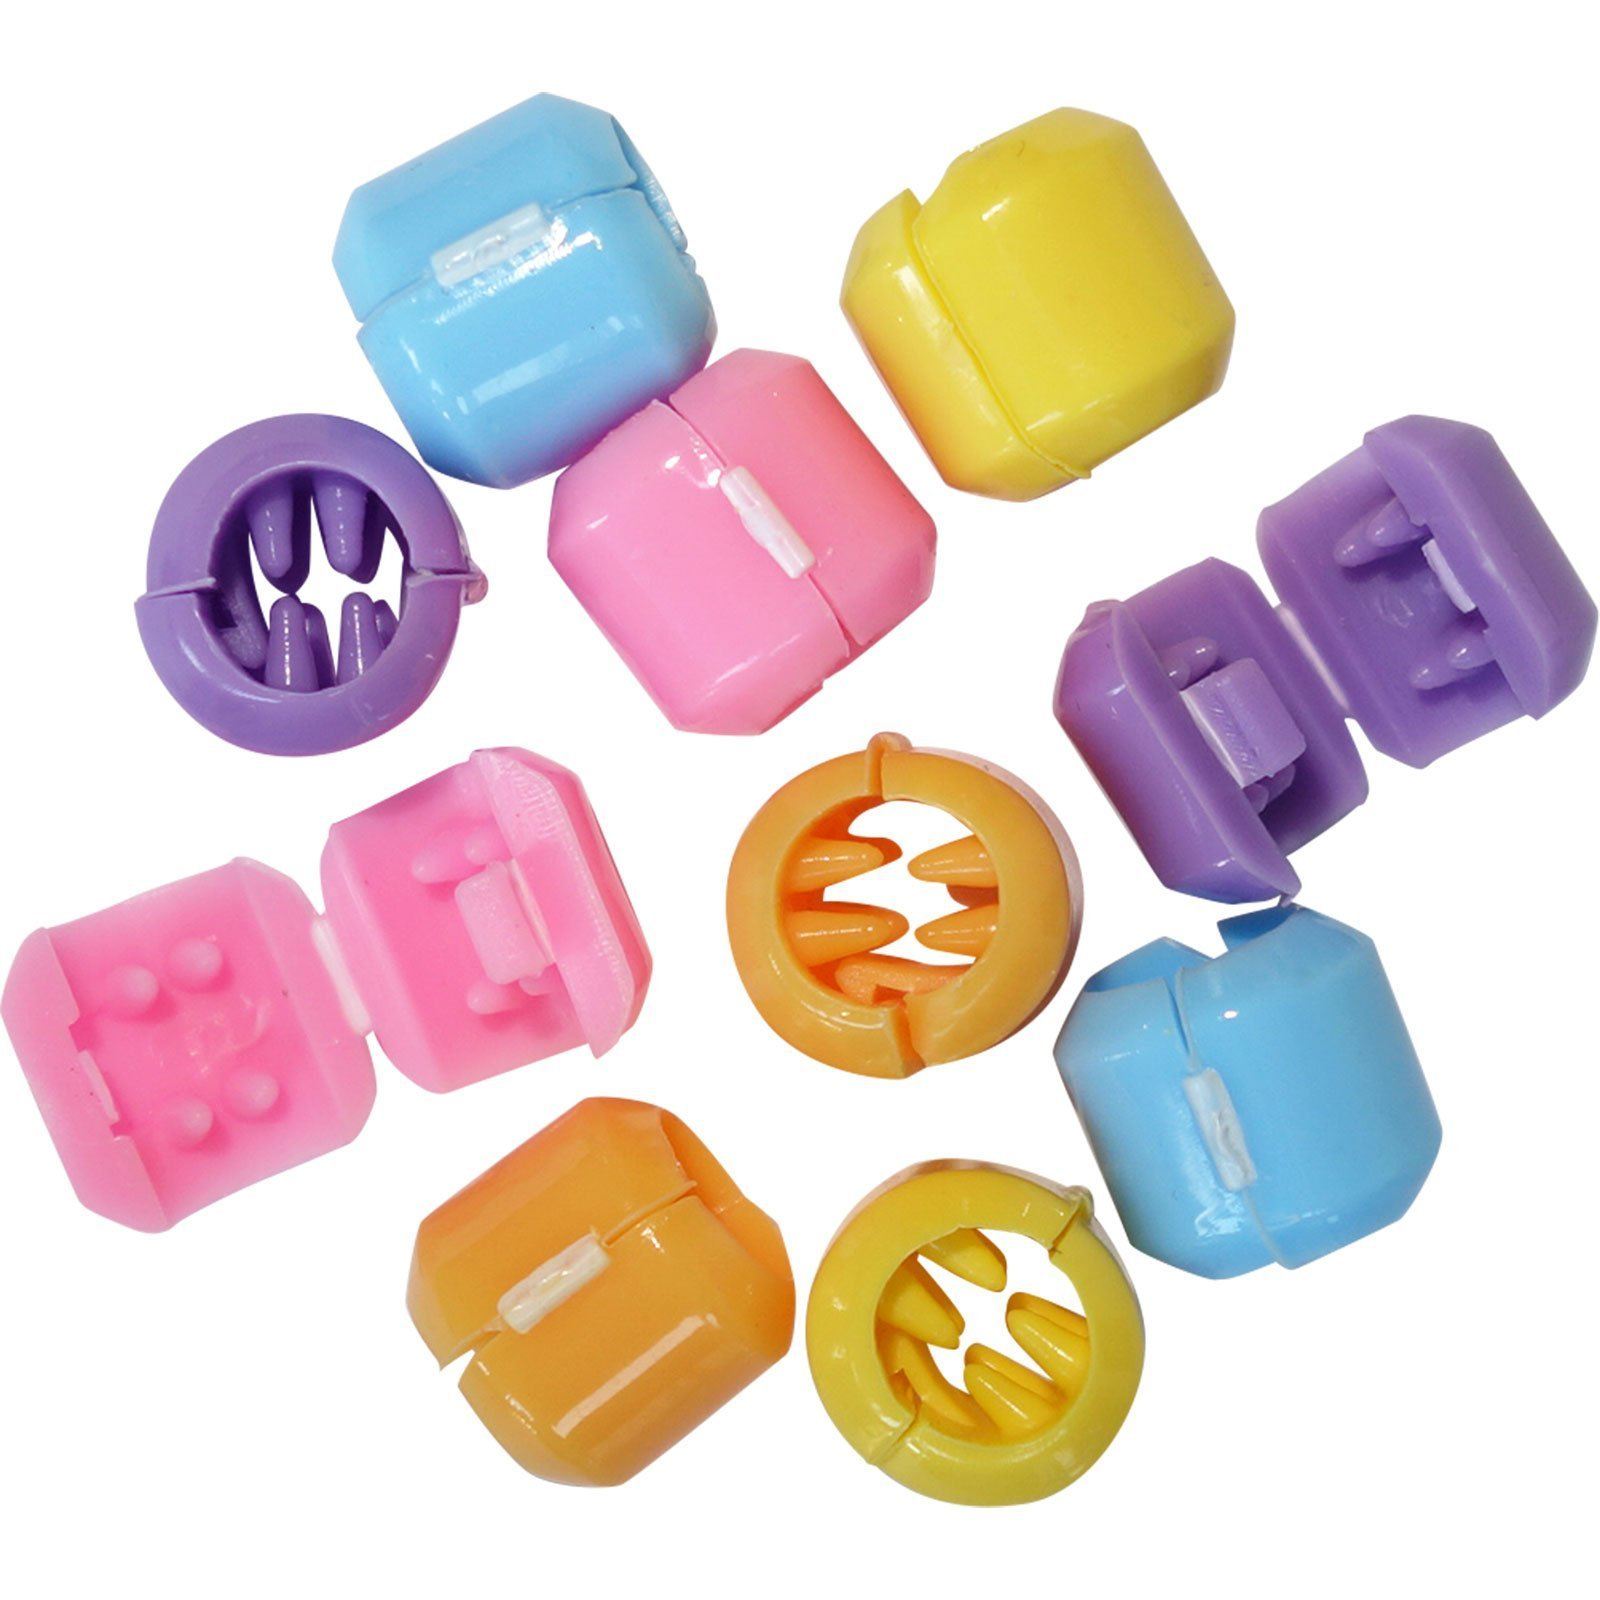 Hair Beads Ponytail Braiding Pony Tail Plait Braid Bead Clips Clamps Grips Girls